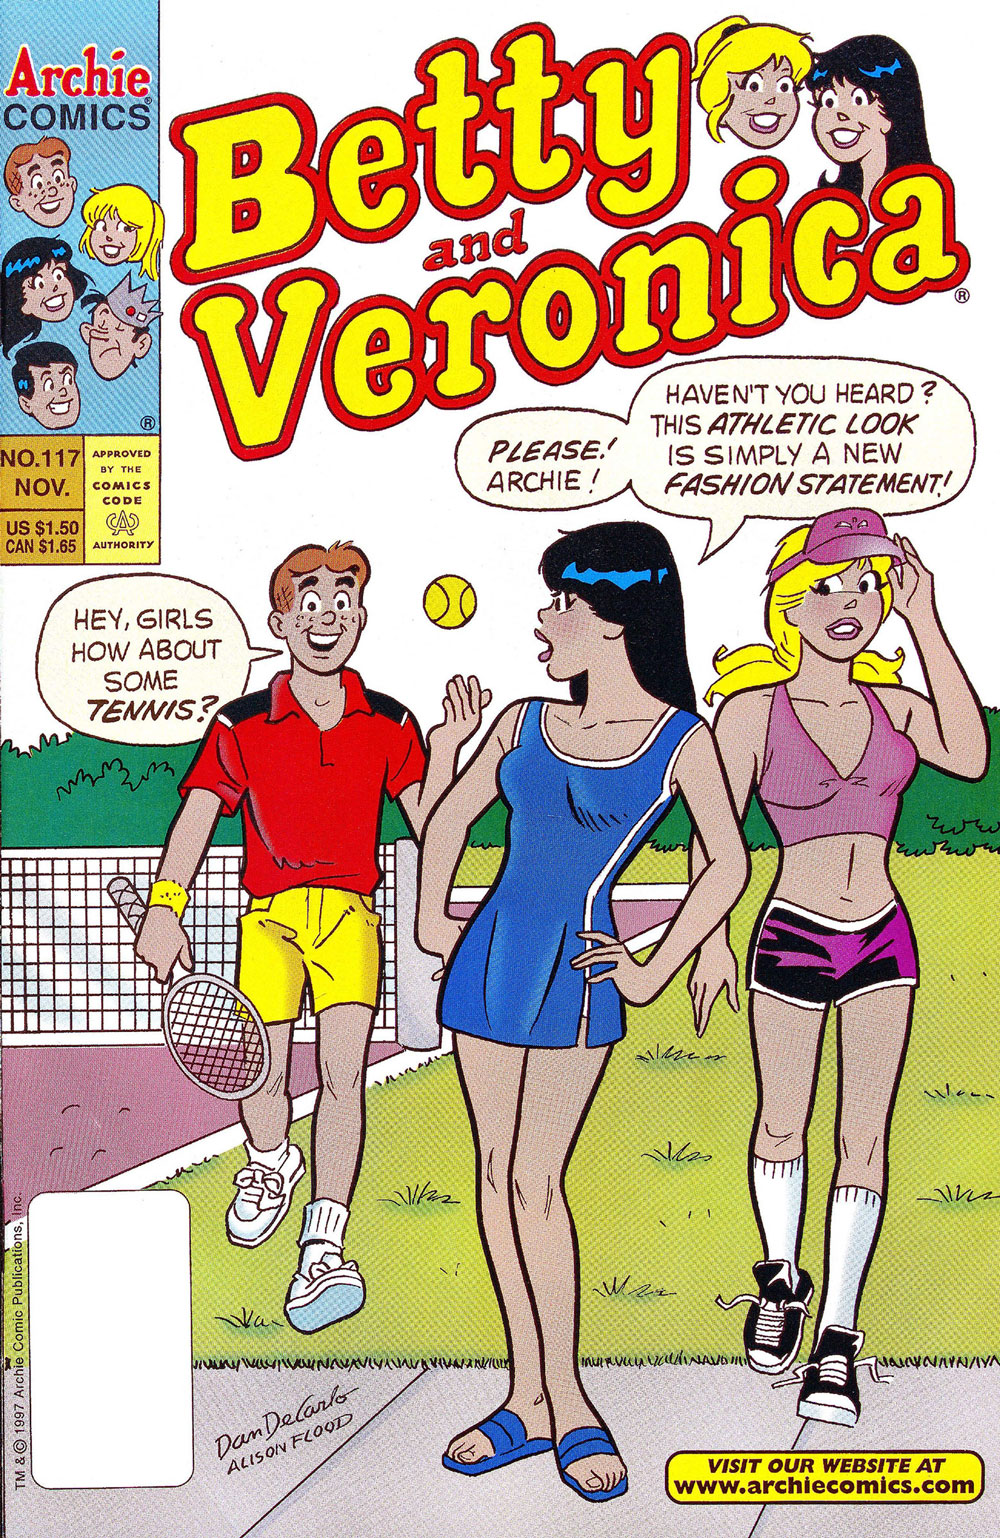 The cover of BETTY AND VERONICA #117. Archie asks Betty and Veronica to play tennis, but Veronica says their tennis outfits are for fashion only.